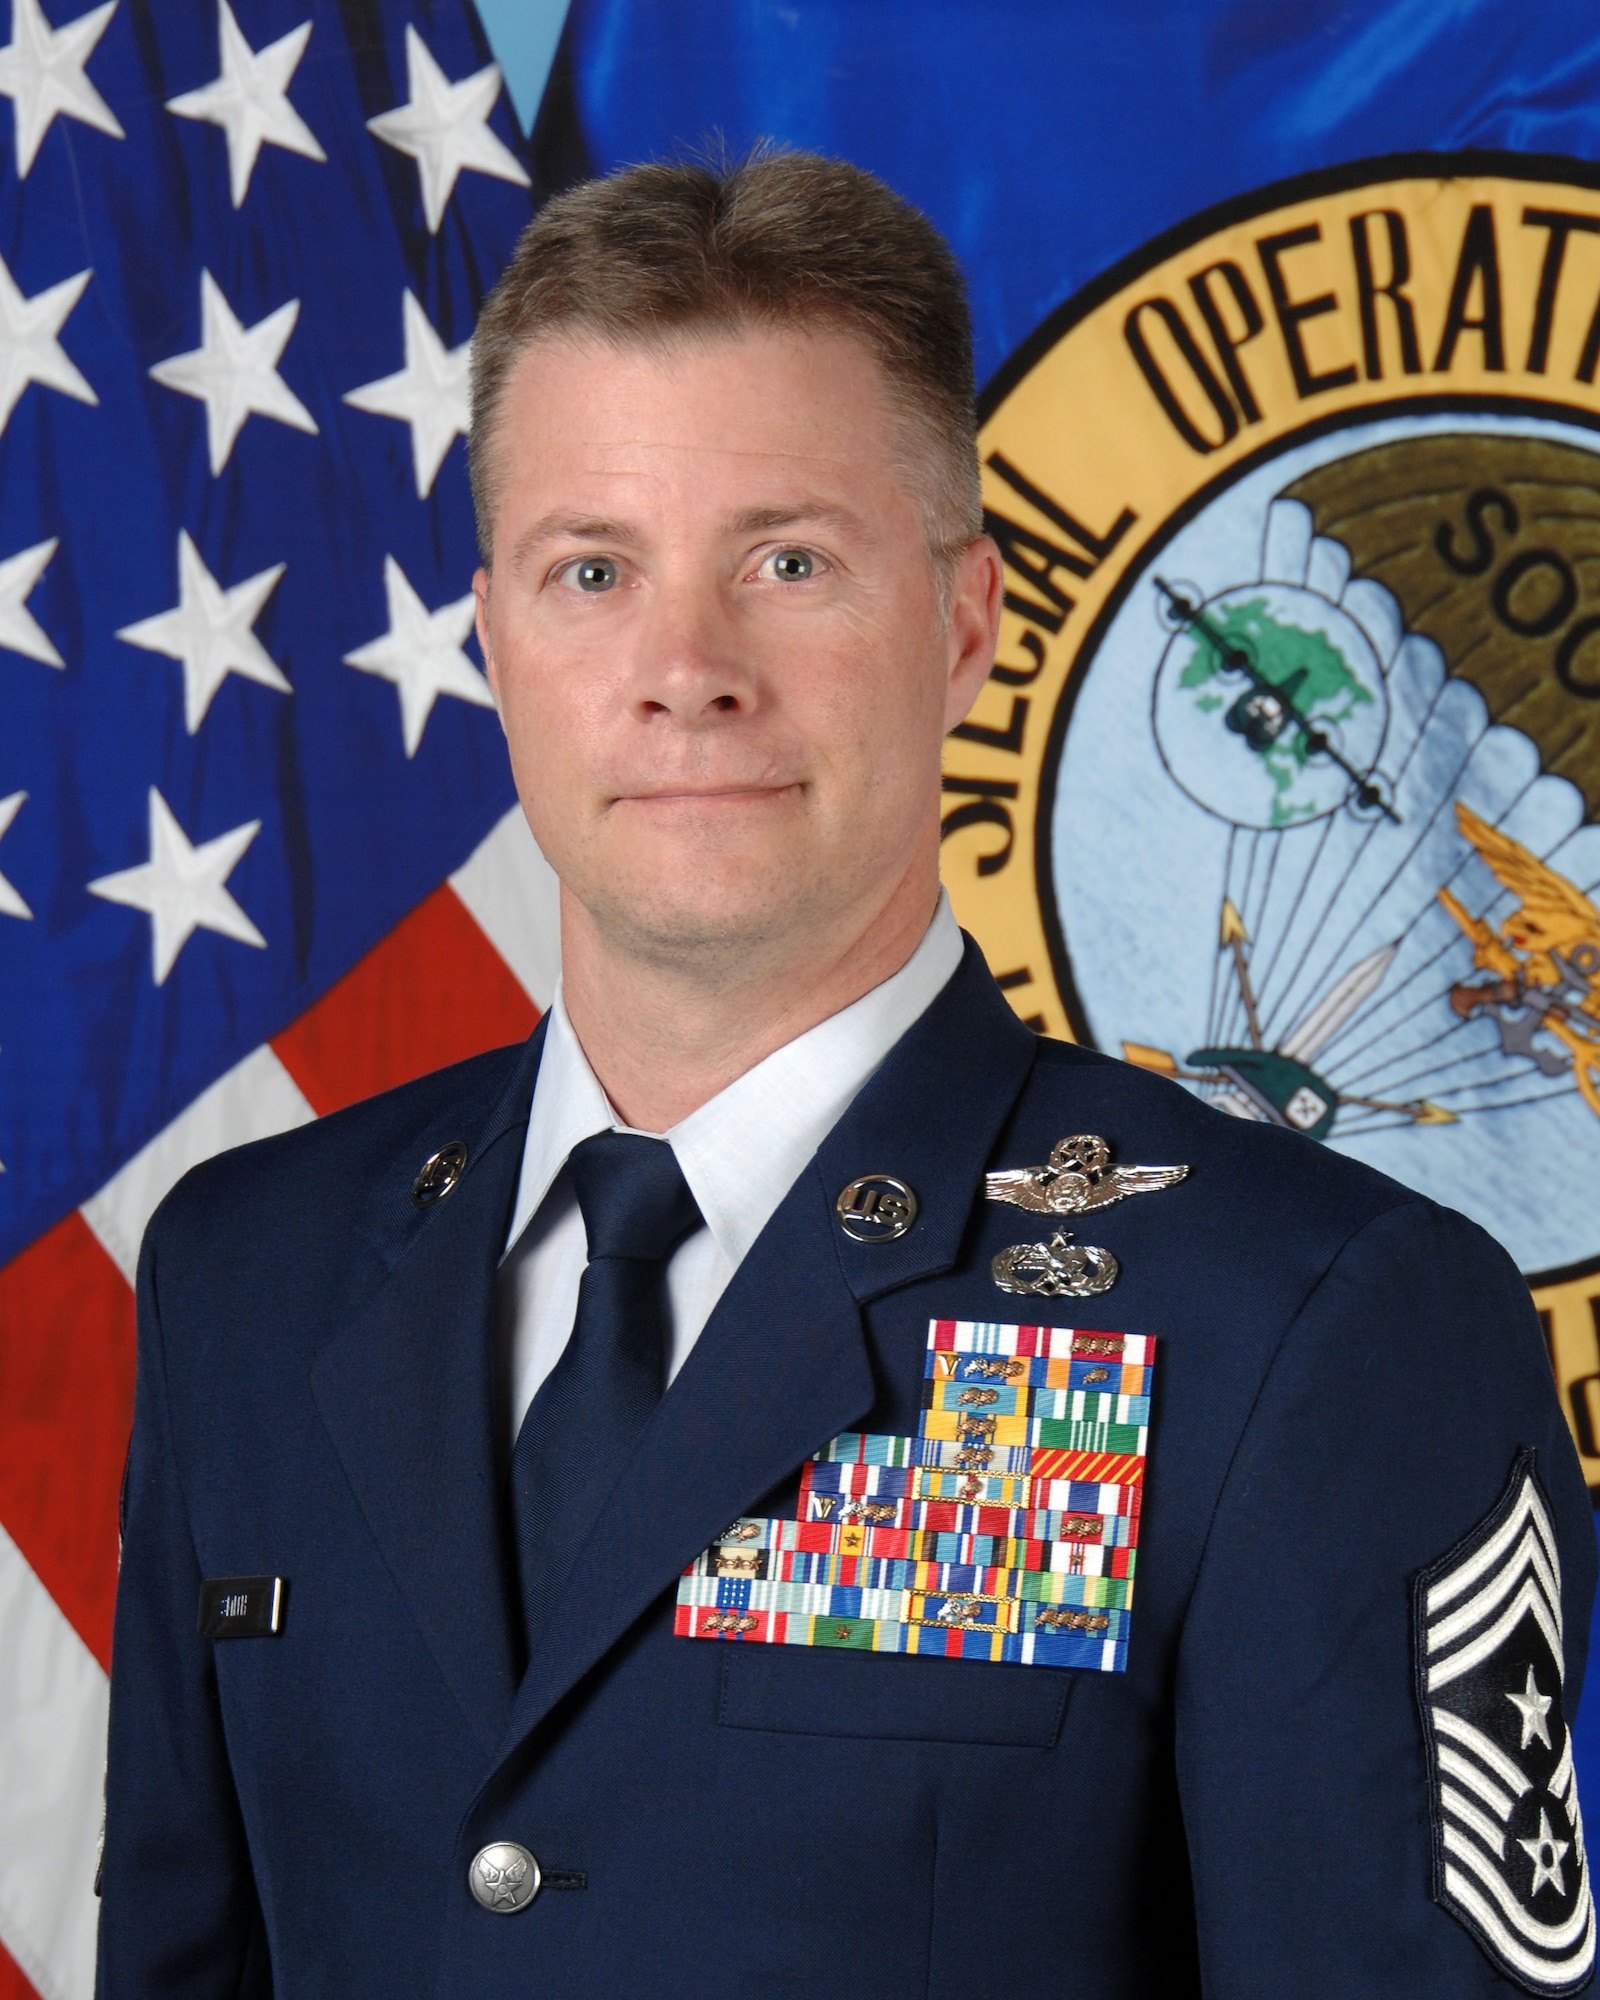 Chief Master Sgt. Gregory Smith, a veteran Air Commando will return here in June as the new senior enlisted leader for Air Force Special Operations Command.  He will take over for Chief Master Sgt. Matt Caruso, who moves to U.S. Transportation Command. (Air Force photo)